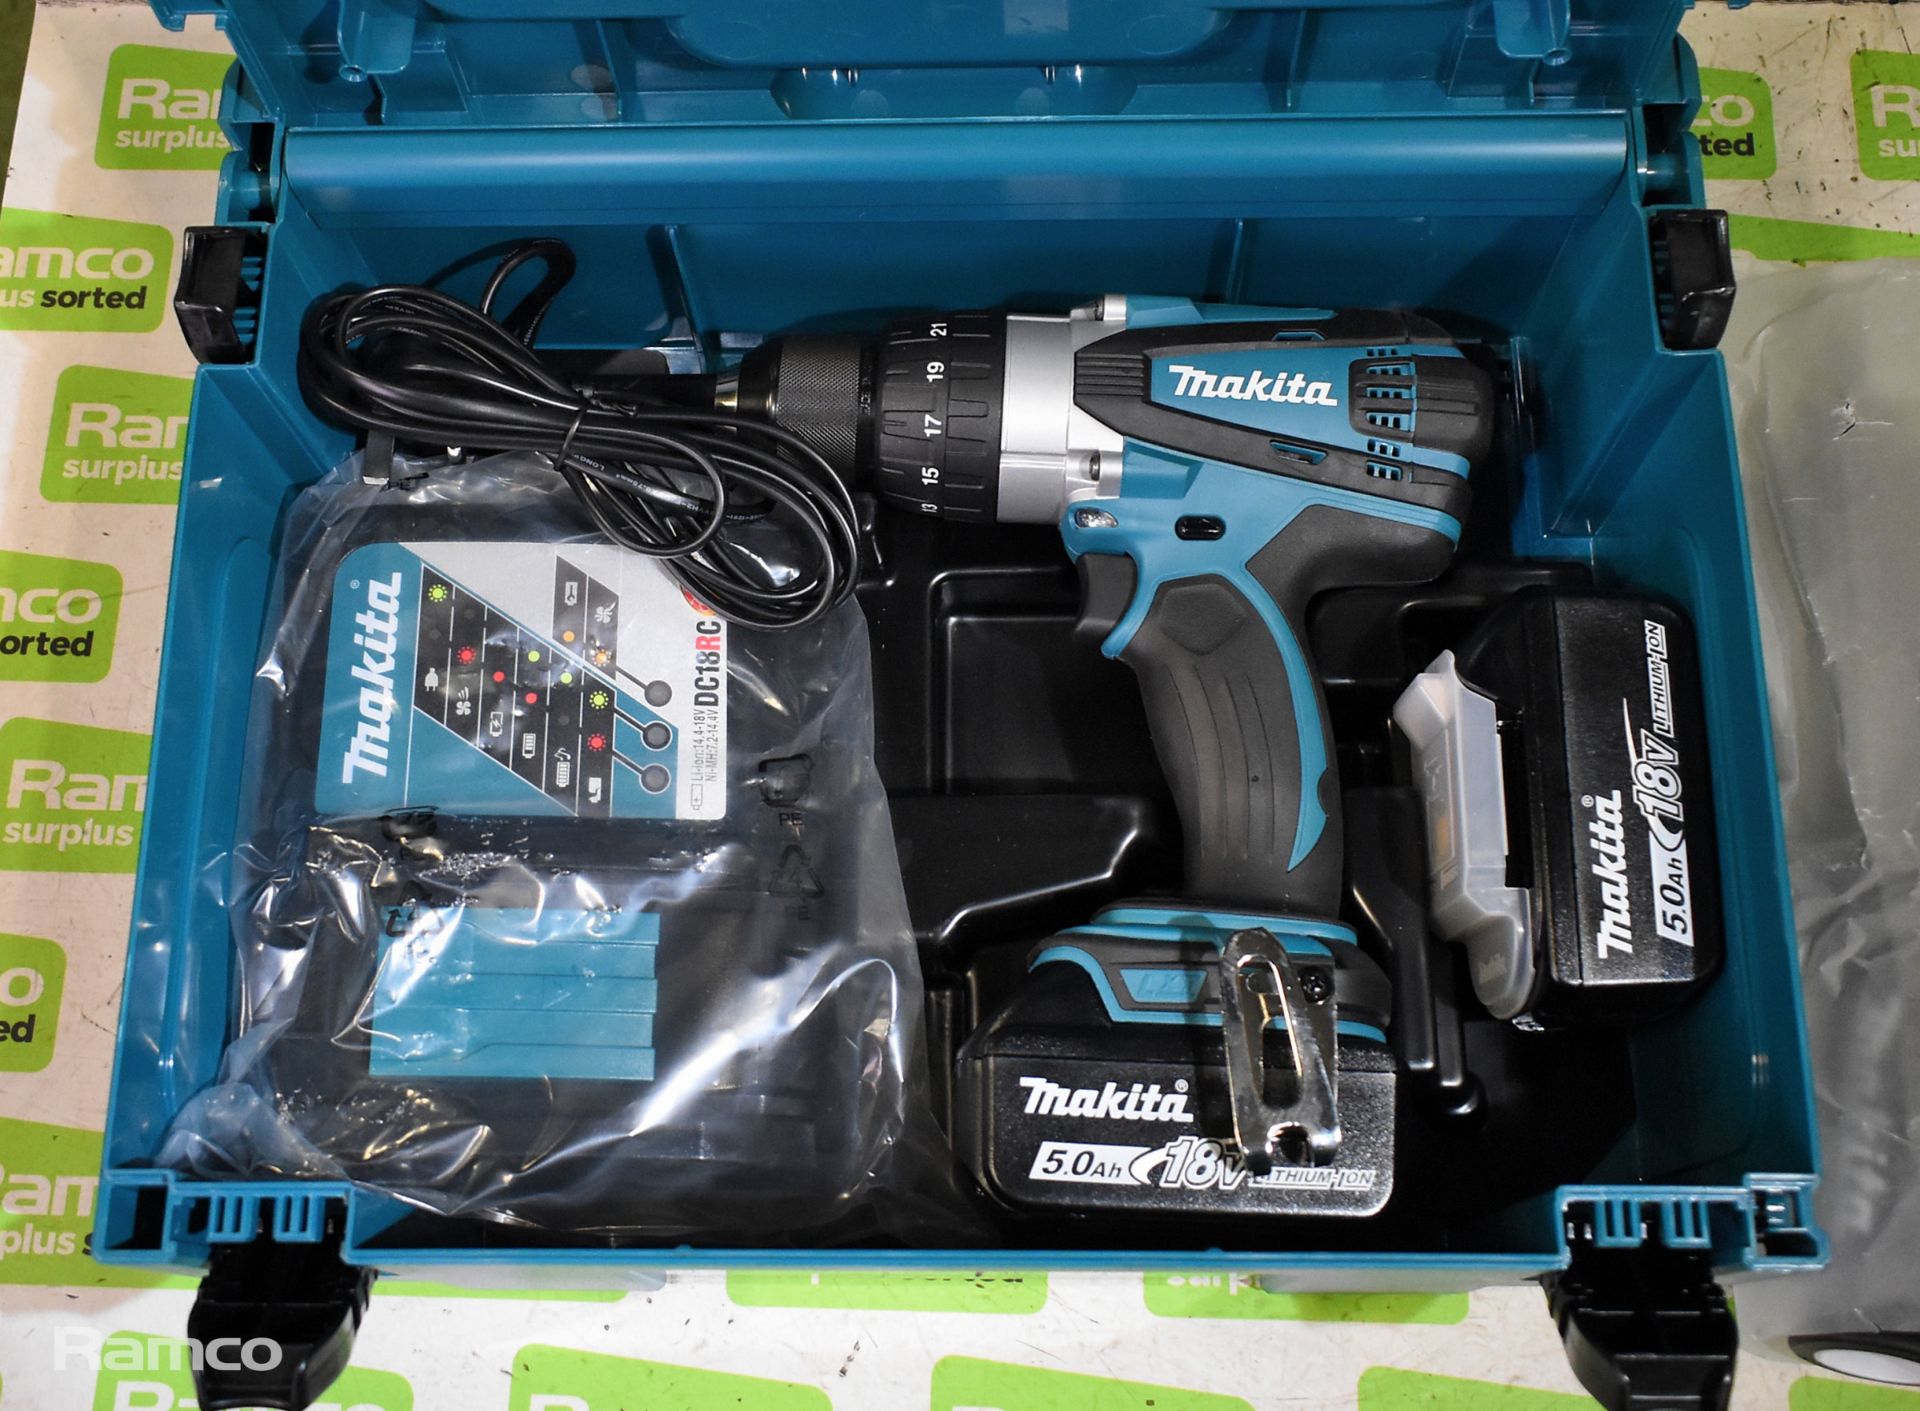 Makita DHP458RTJ 18v combi drill with 2x 5.0Ah batteries and charger - in case - Image 2 of 9